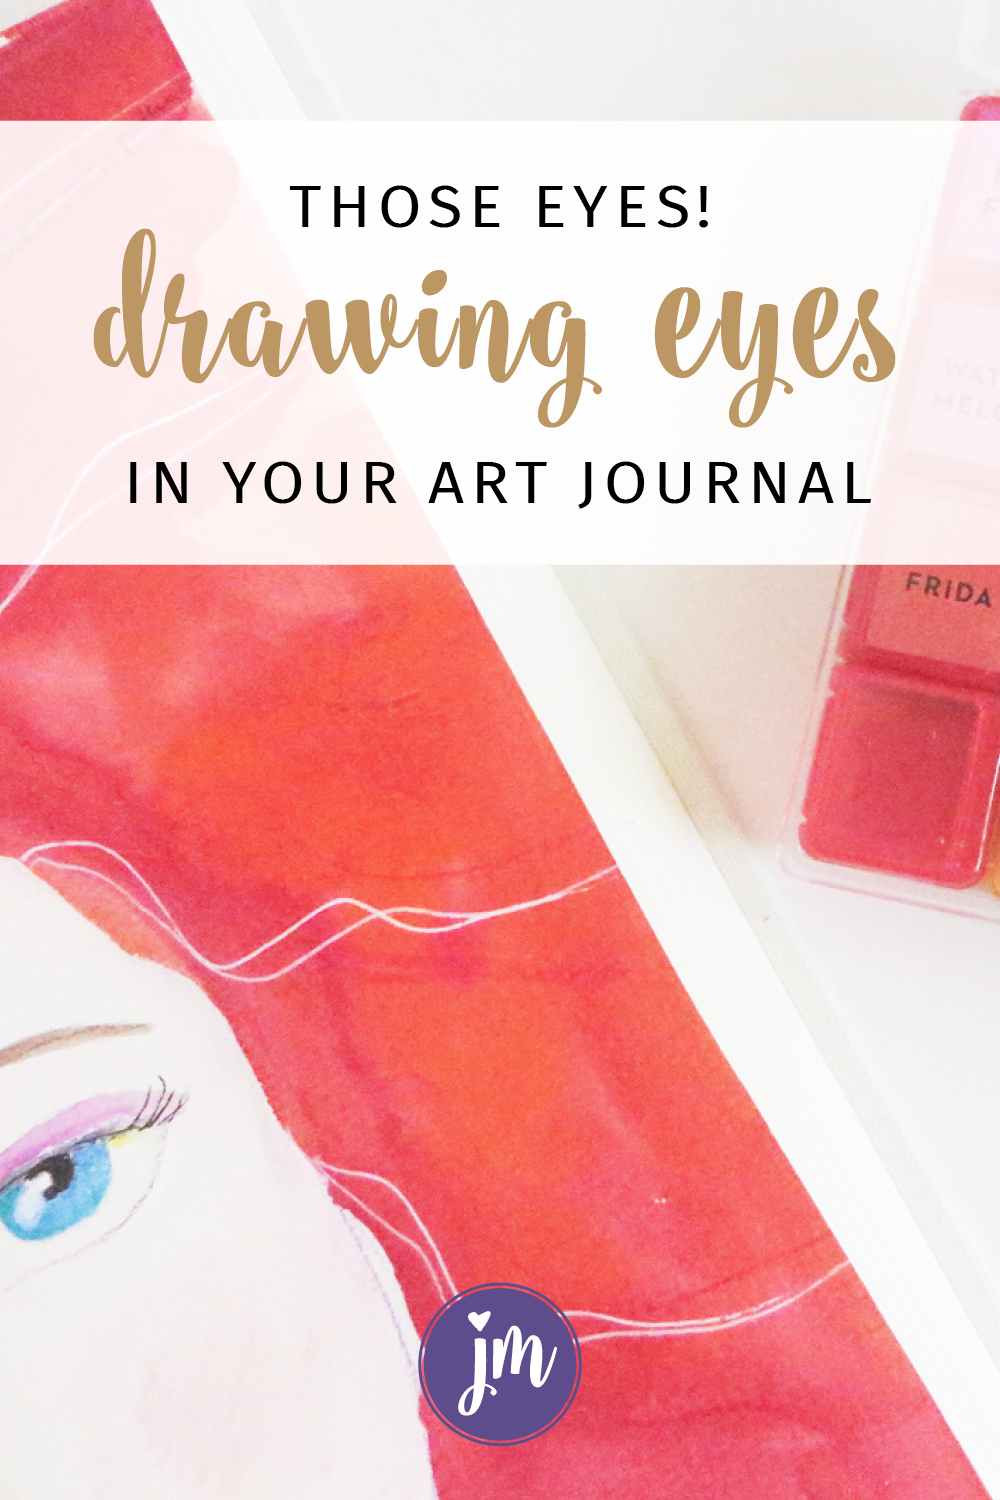 "The eyes are the window of the soul." Learn to draw eyes for your journal as well as avoid some common mixed media journal mistakes!